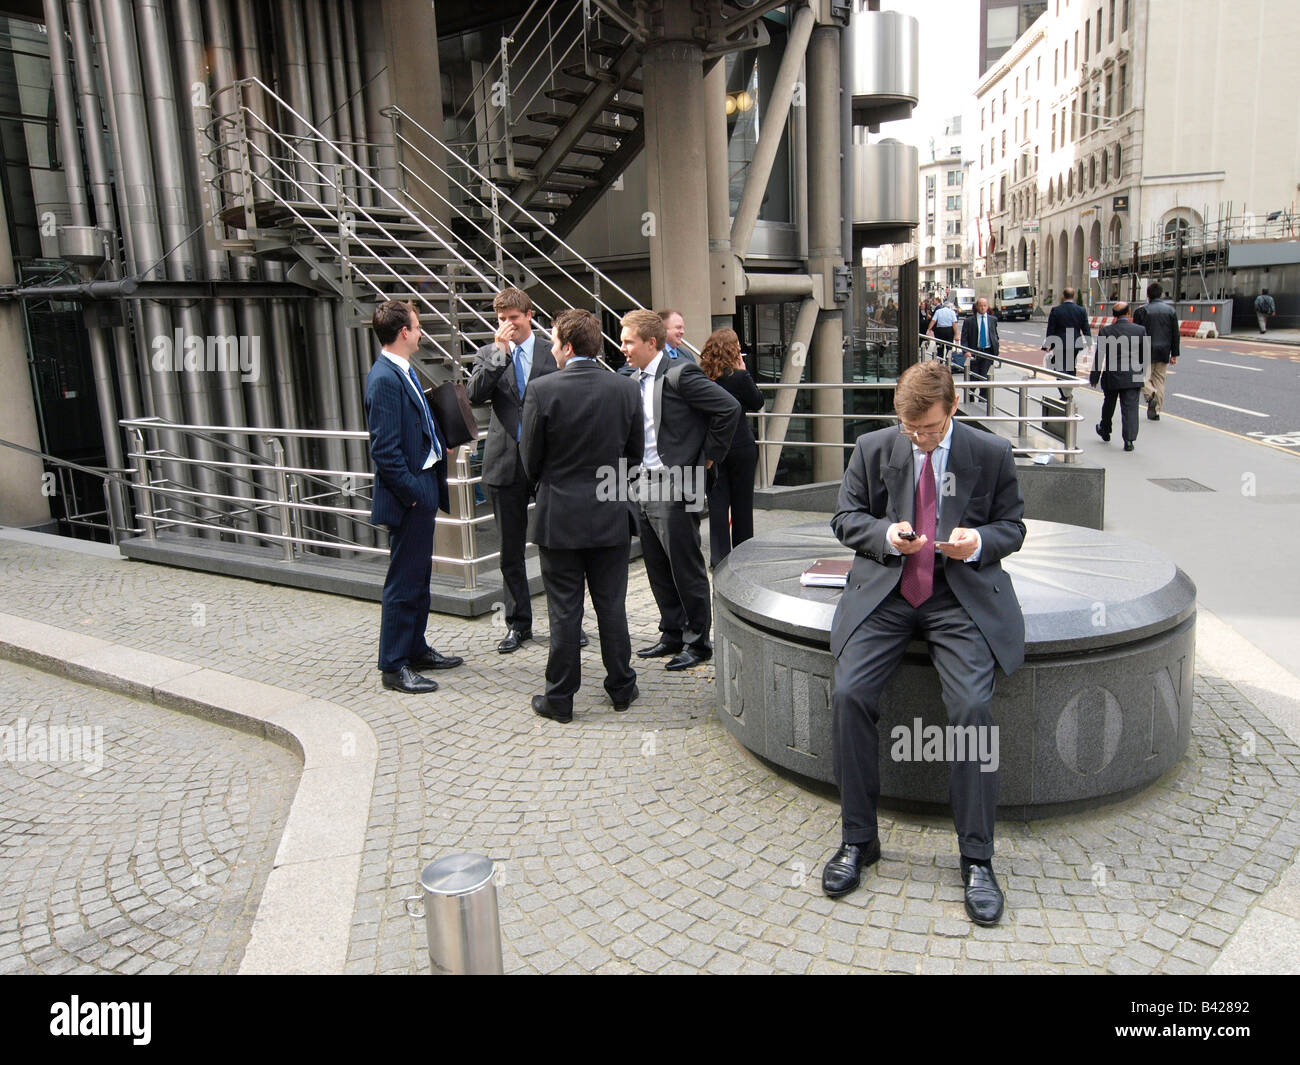 Businessmen networking in front of the Lloyds building in the London city UK Stock Photo